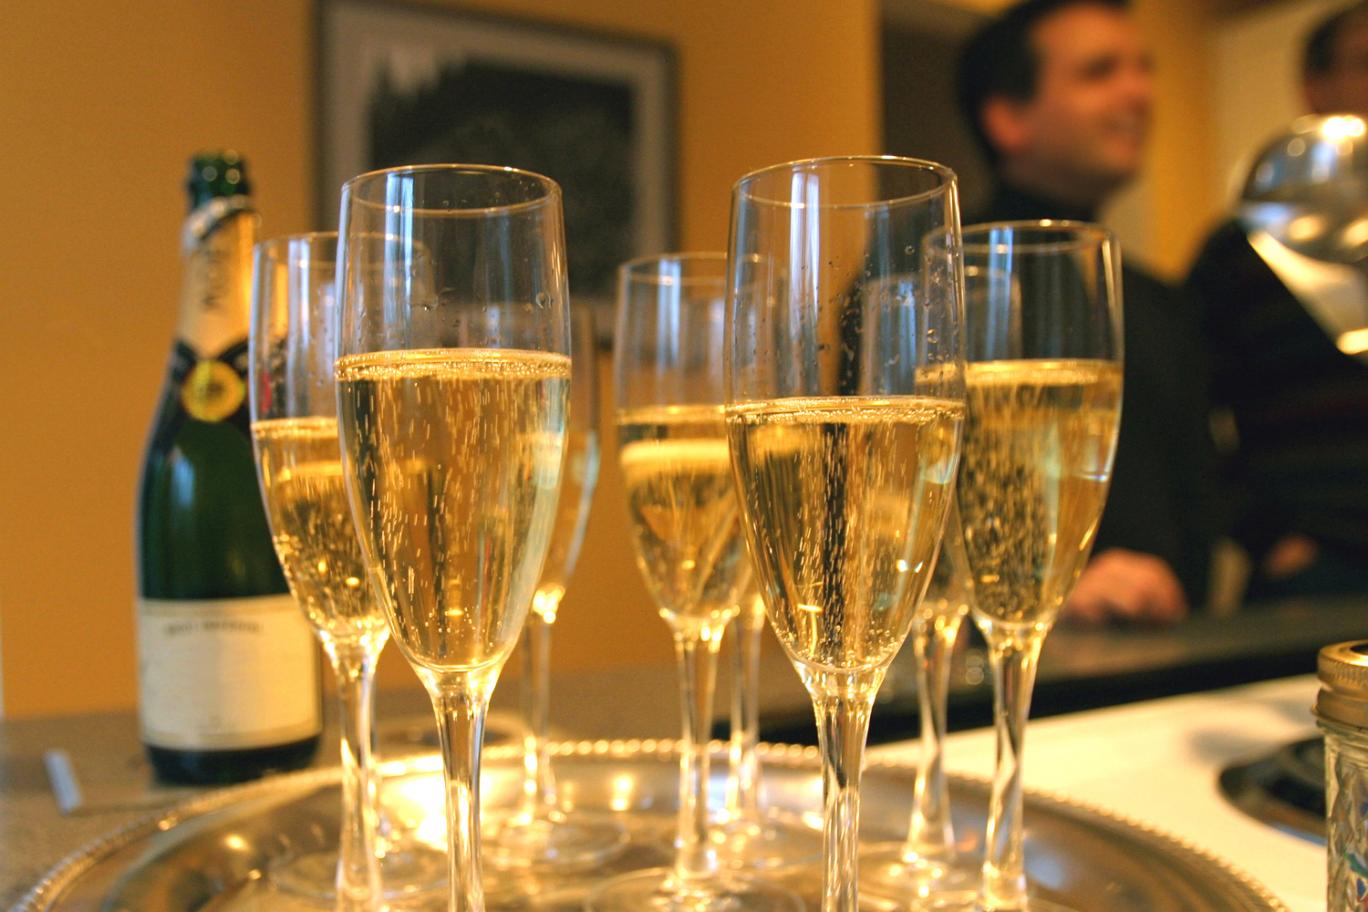 Drinking three glasses of champagne "could help prevent dementia and Alzheimer's disease"